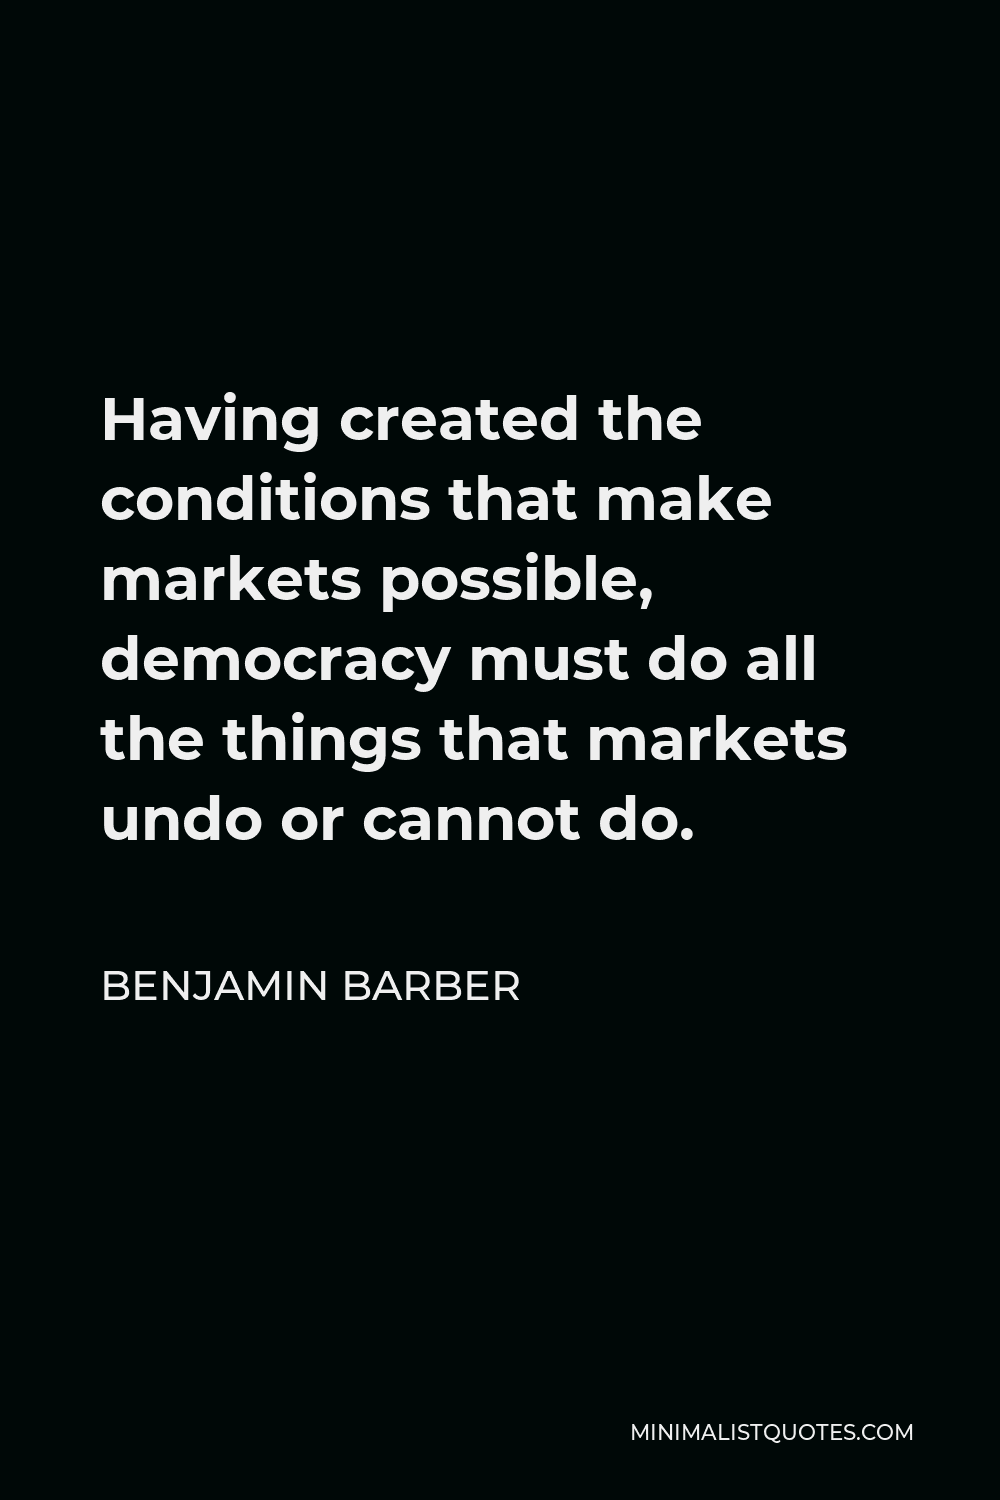 Benjamin Barber Quote - Having created the conditions that make markets possible, democracy must do all the things that markets undo or cannot do.